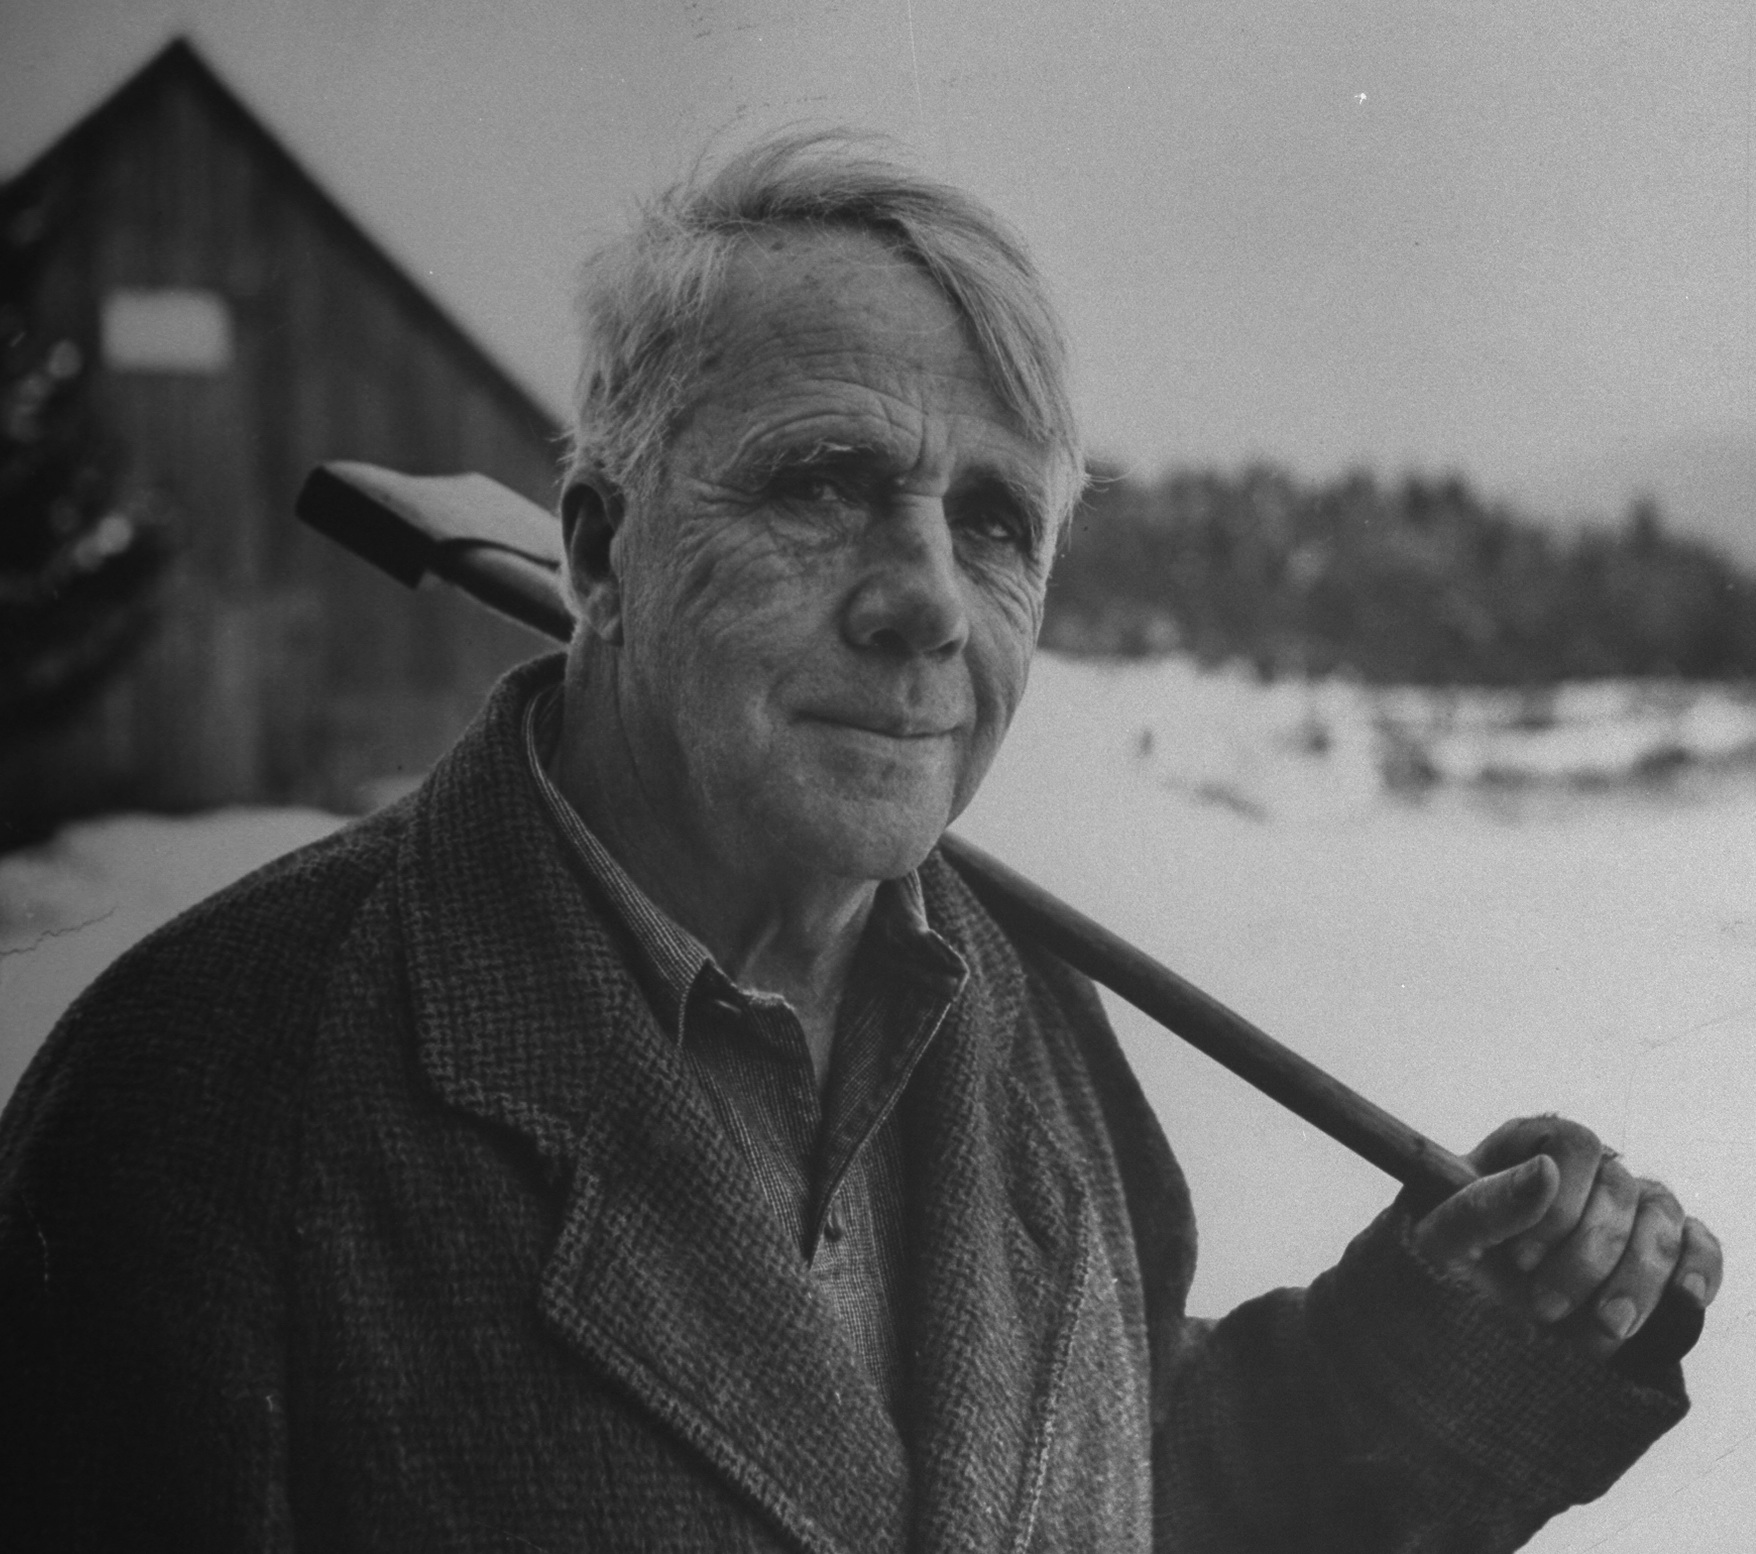 Robert Frost affected a rustic charm but was more urbane than he let on. (Photo: Getty Images)